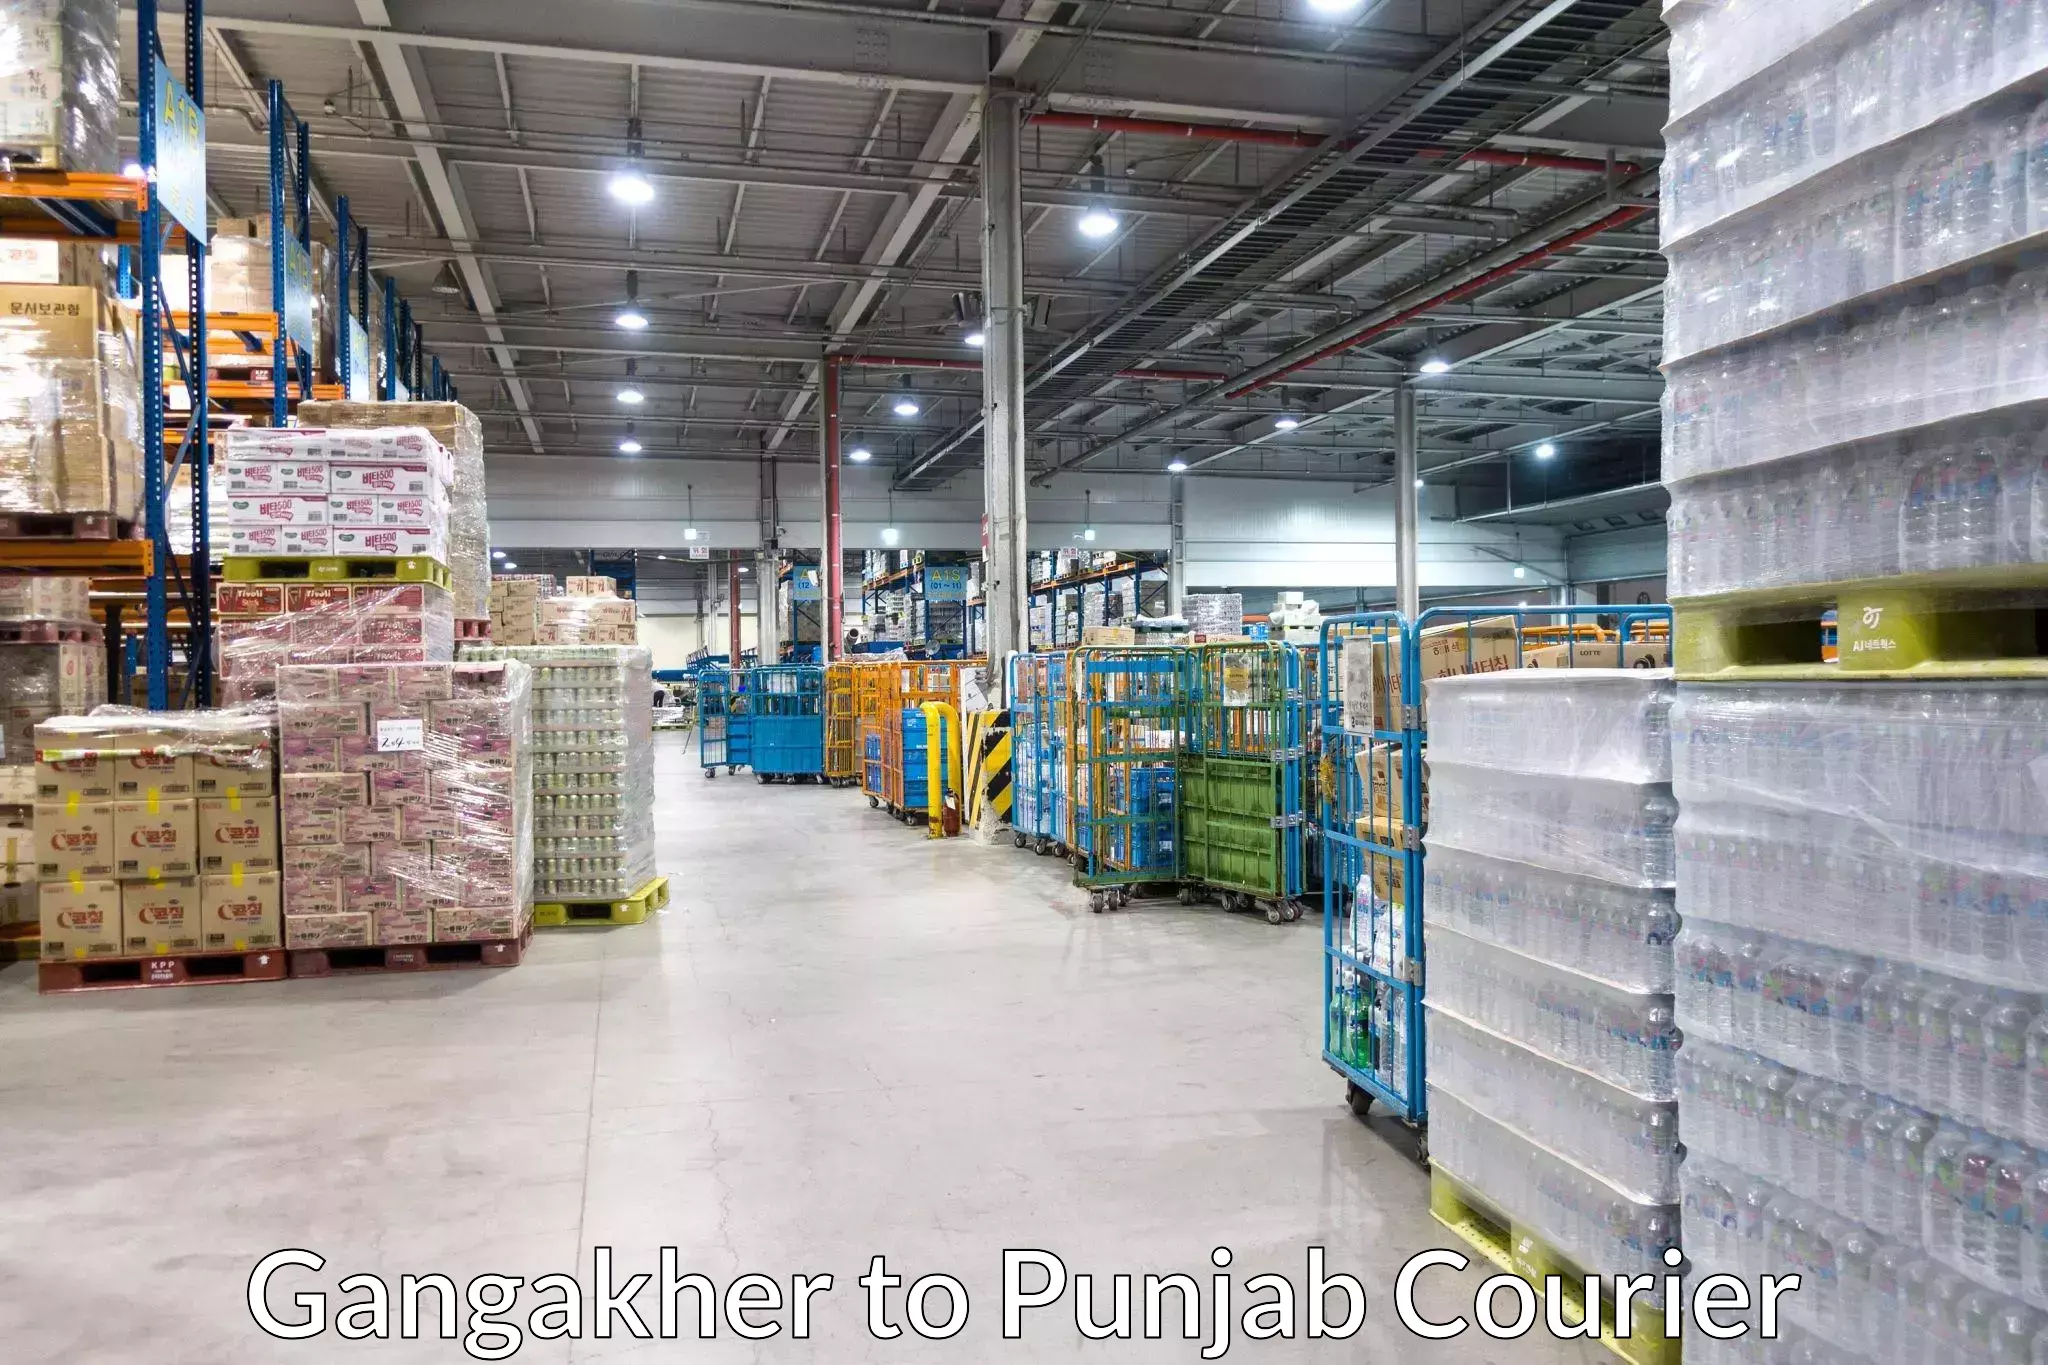 Business delivery service Gangakher to Punjab